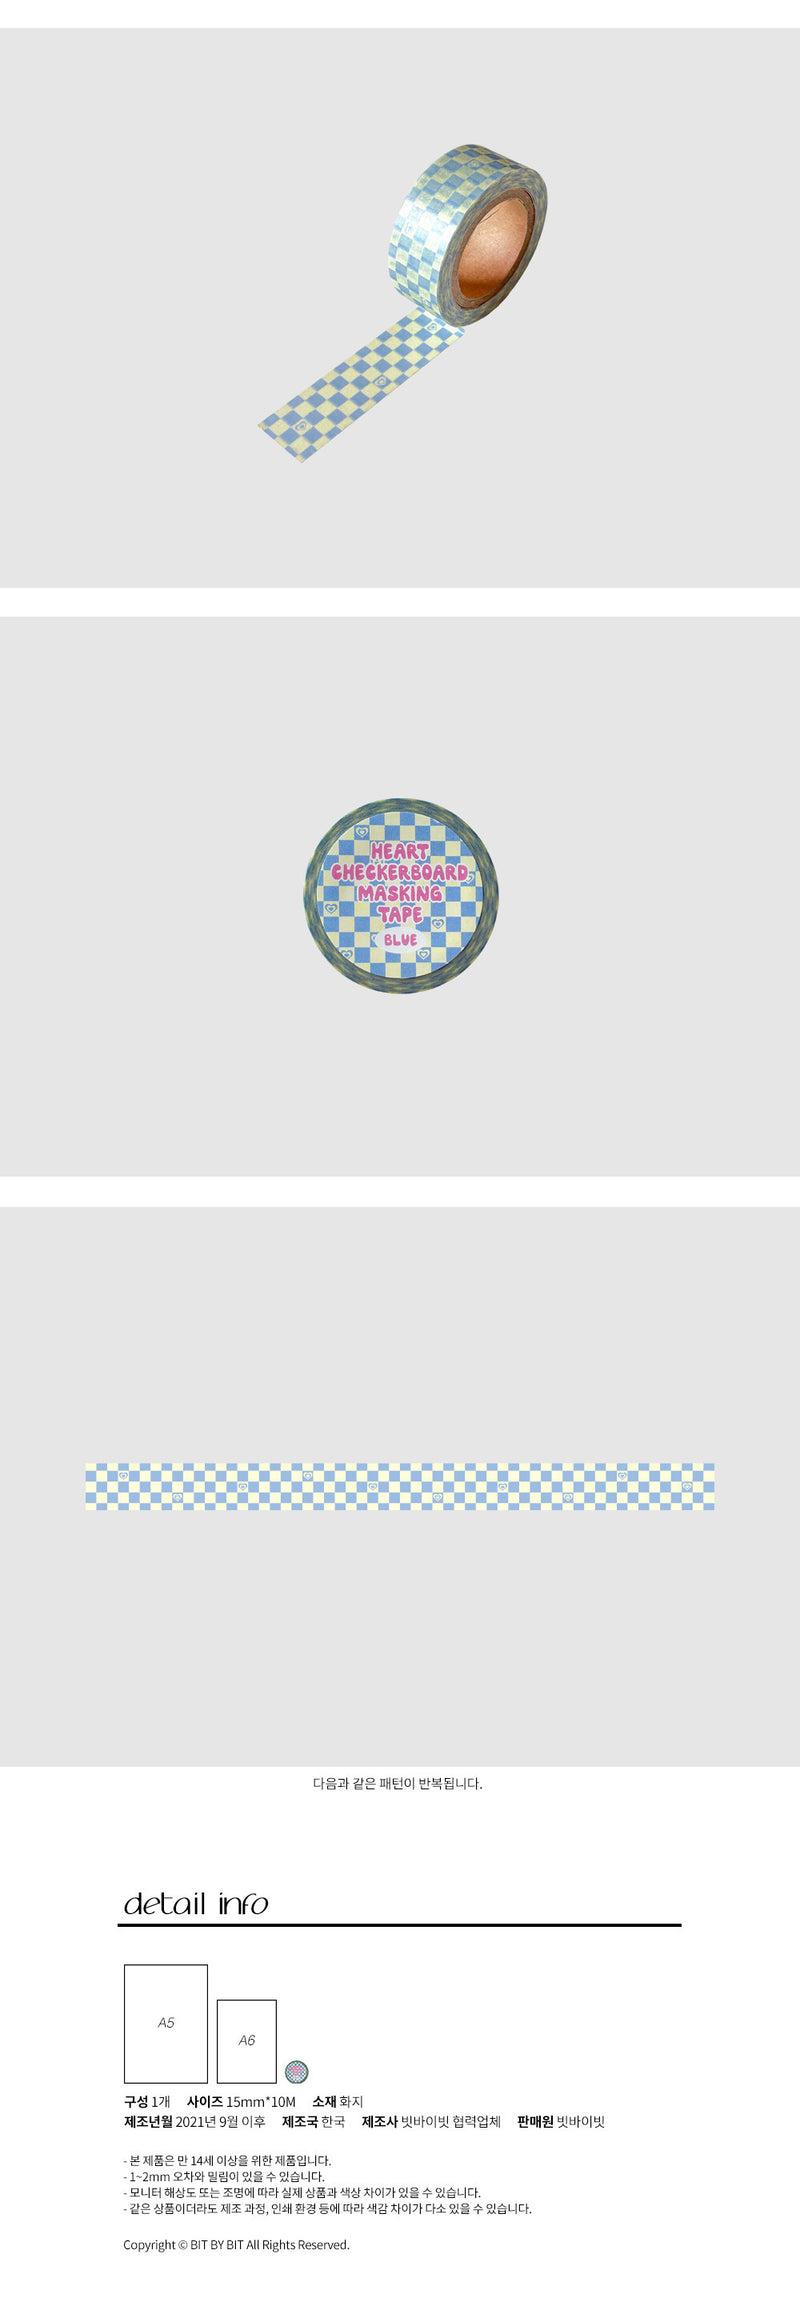 Heart Checkerboard Masking Tape_Blue